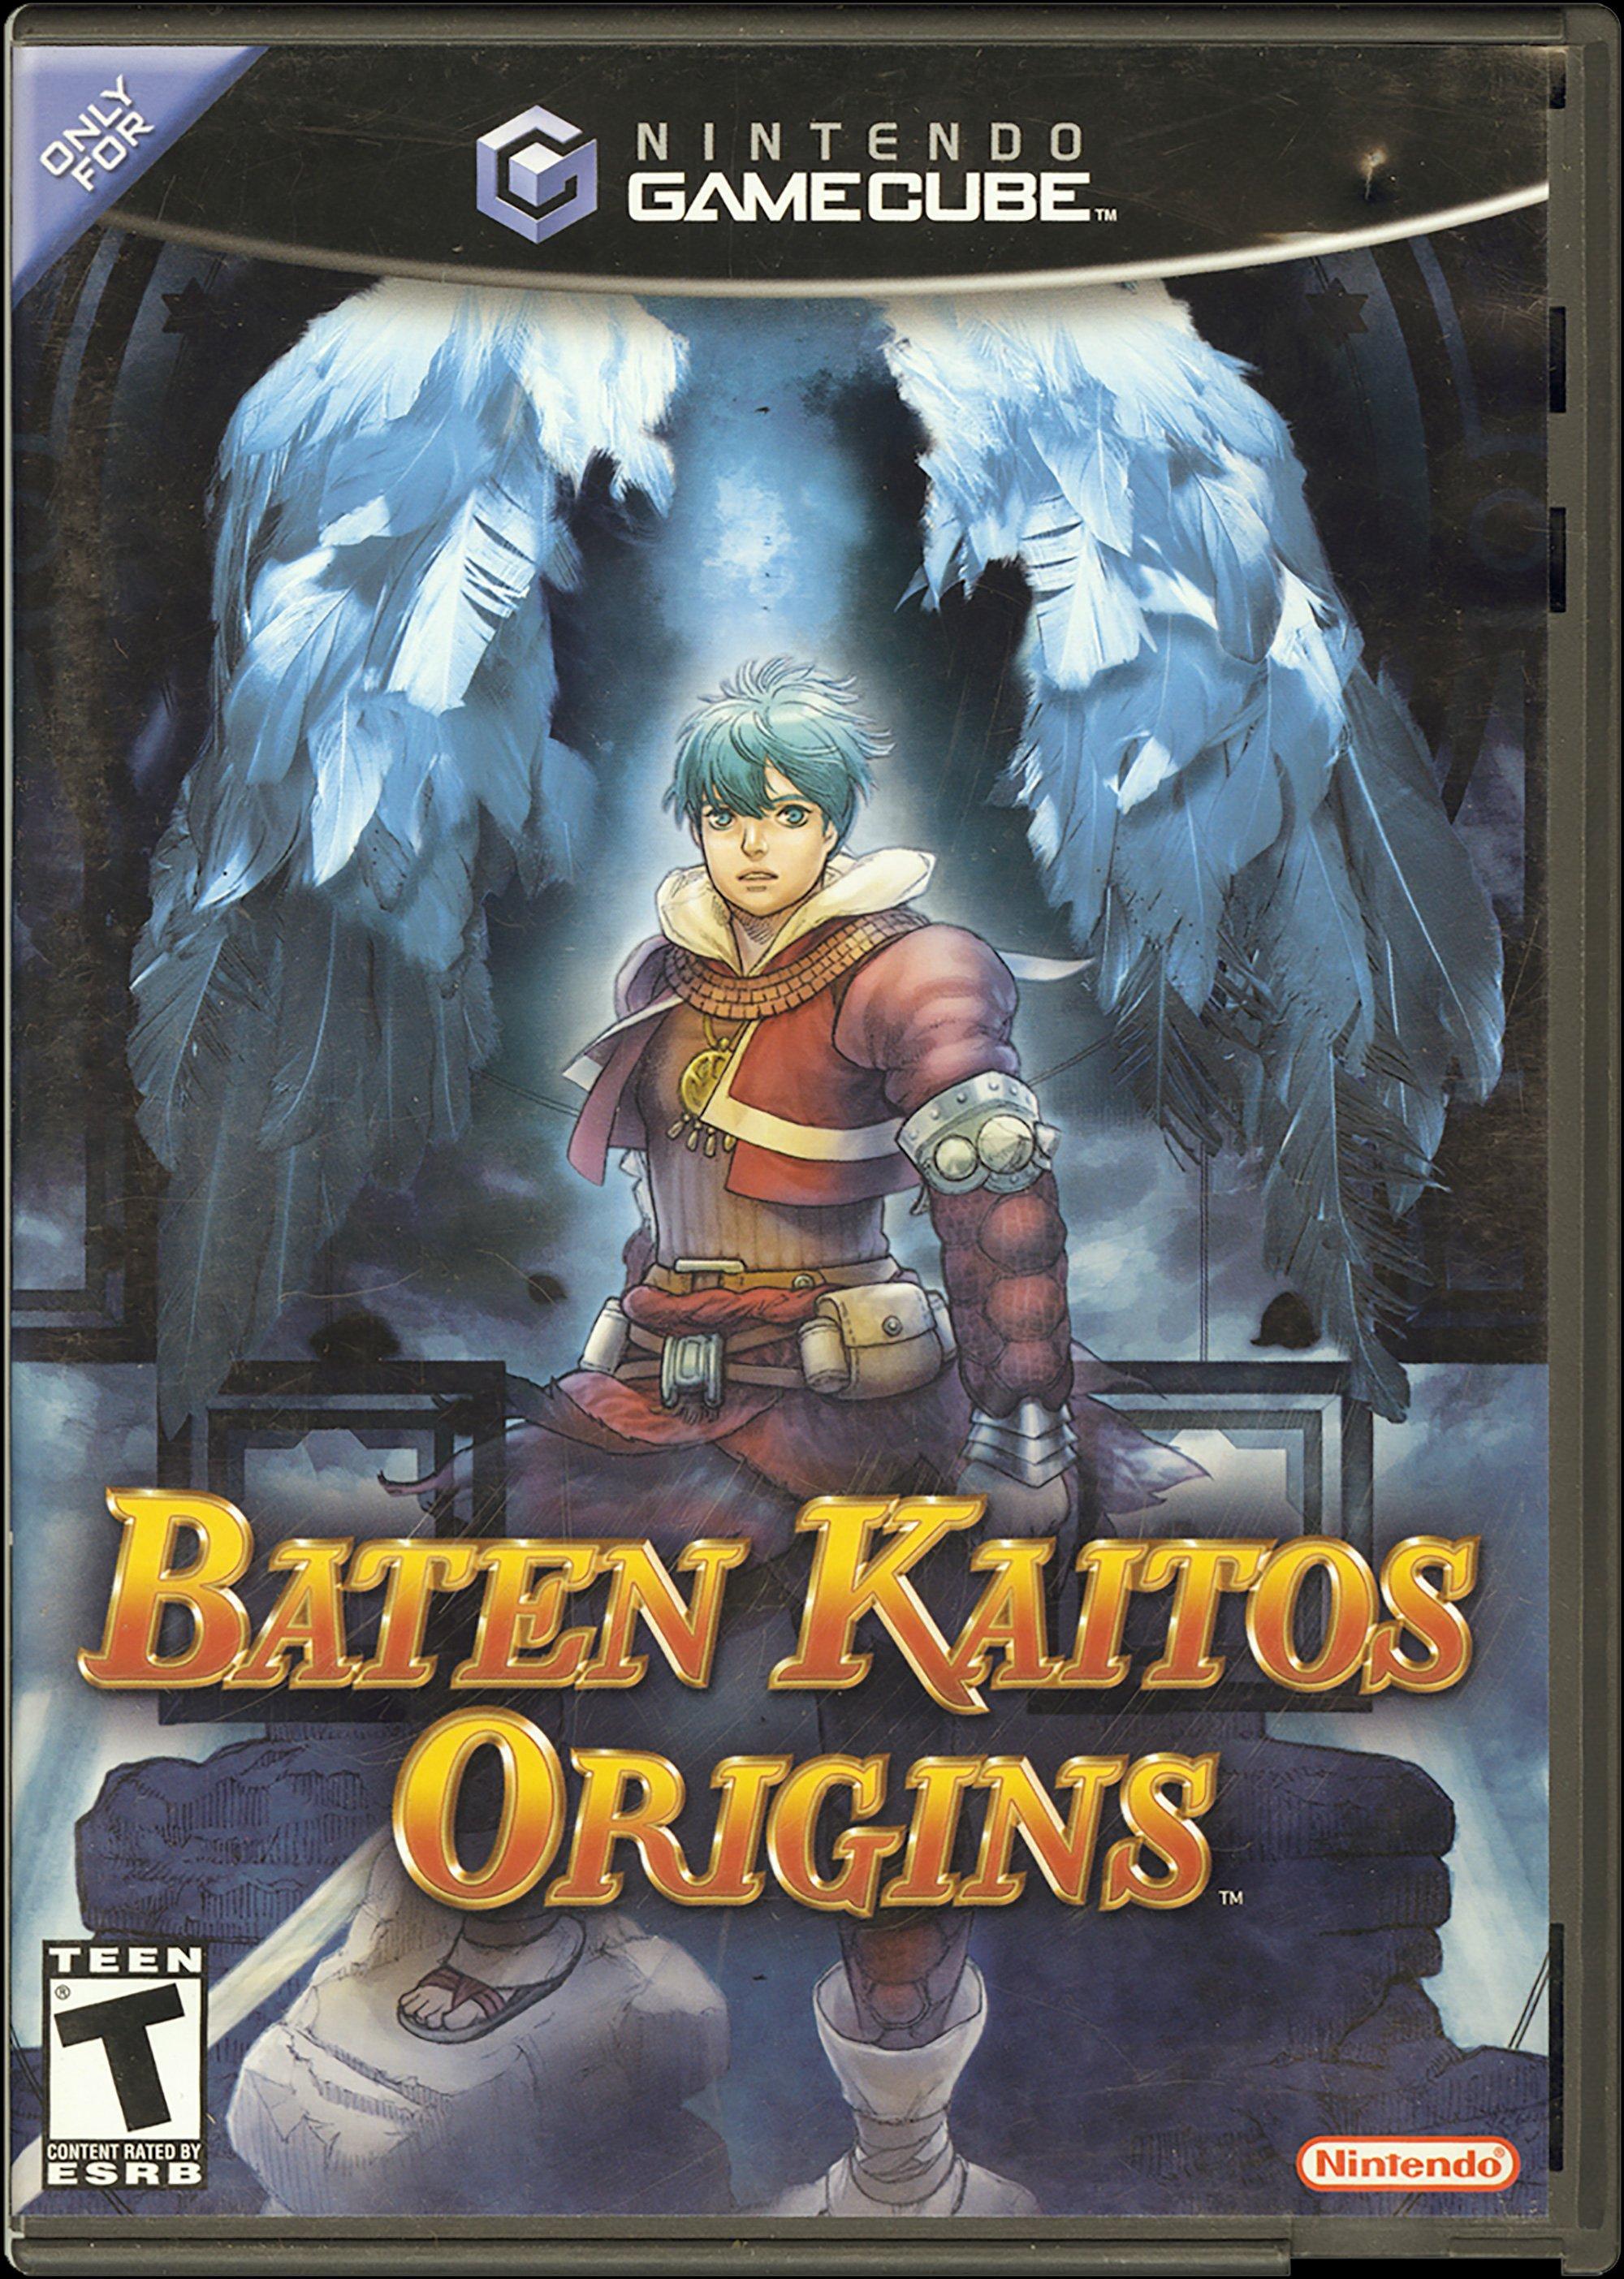 Classic Gamecube Series Baten Kaitos Gets Switch Remaster Set to Release  This Summer